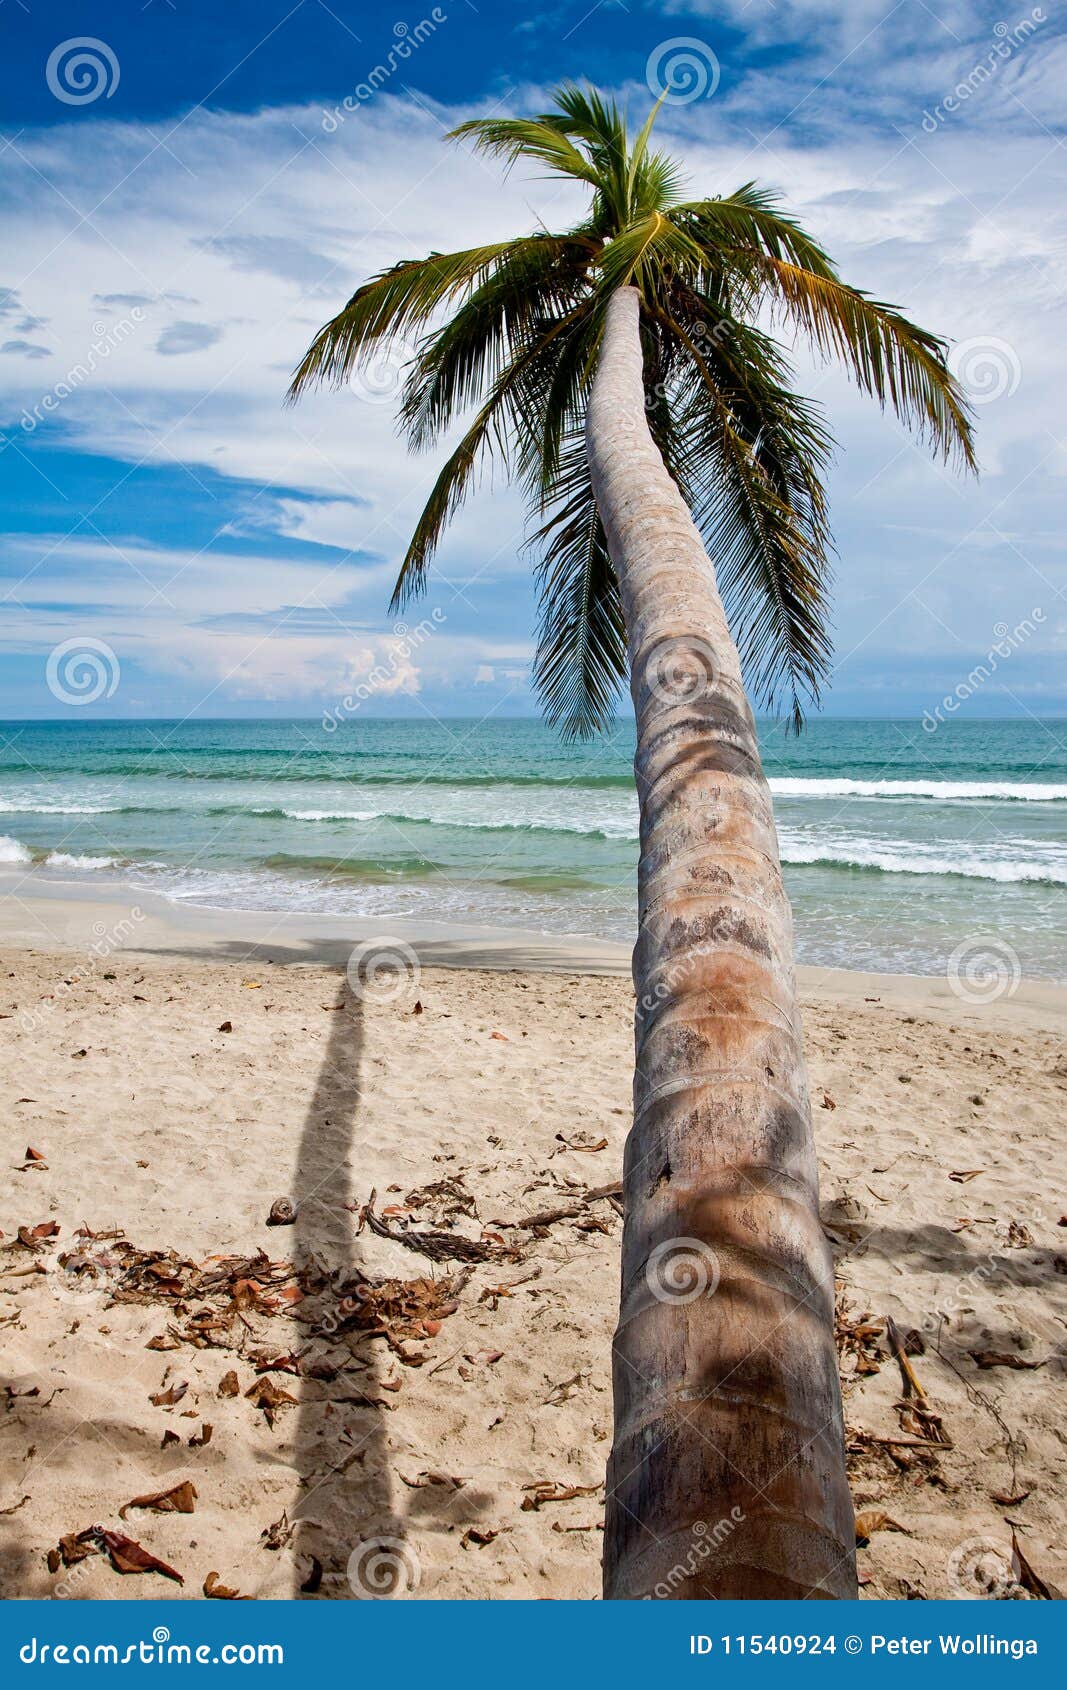 Palm Trees On The Beach Near With Blue Sky Stock Images - Image: 11540924